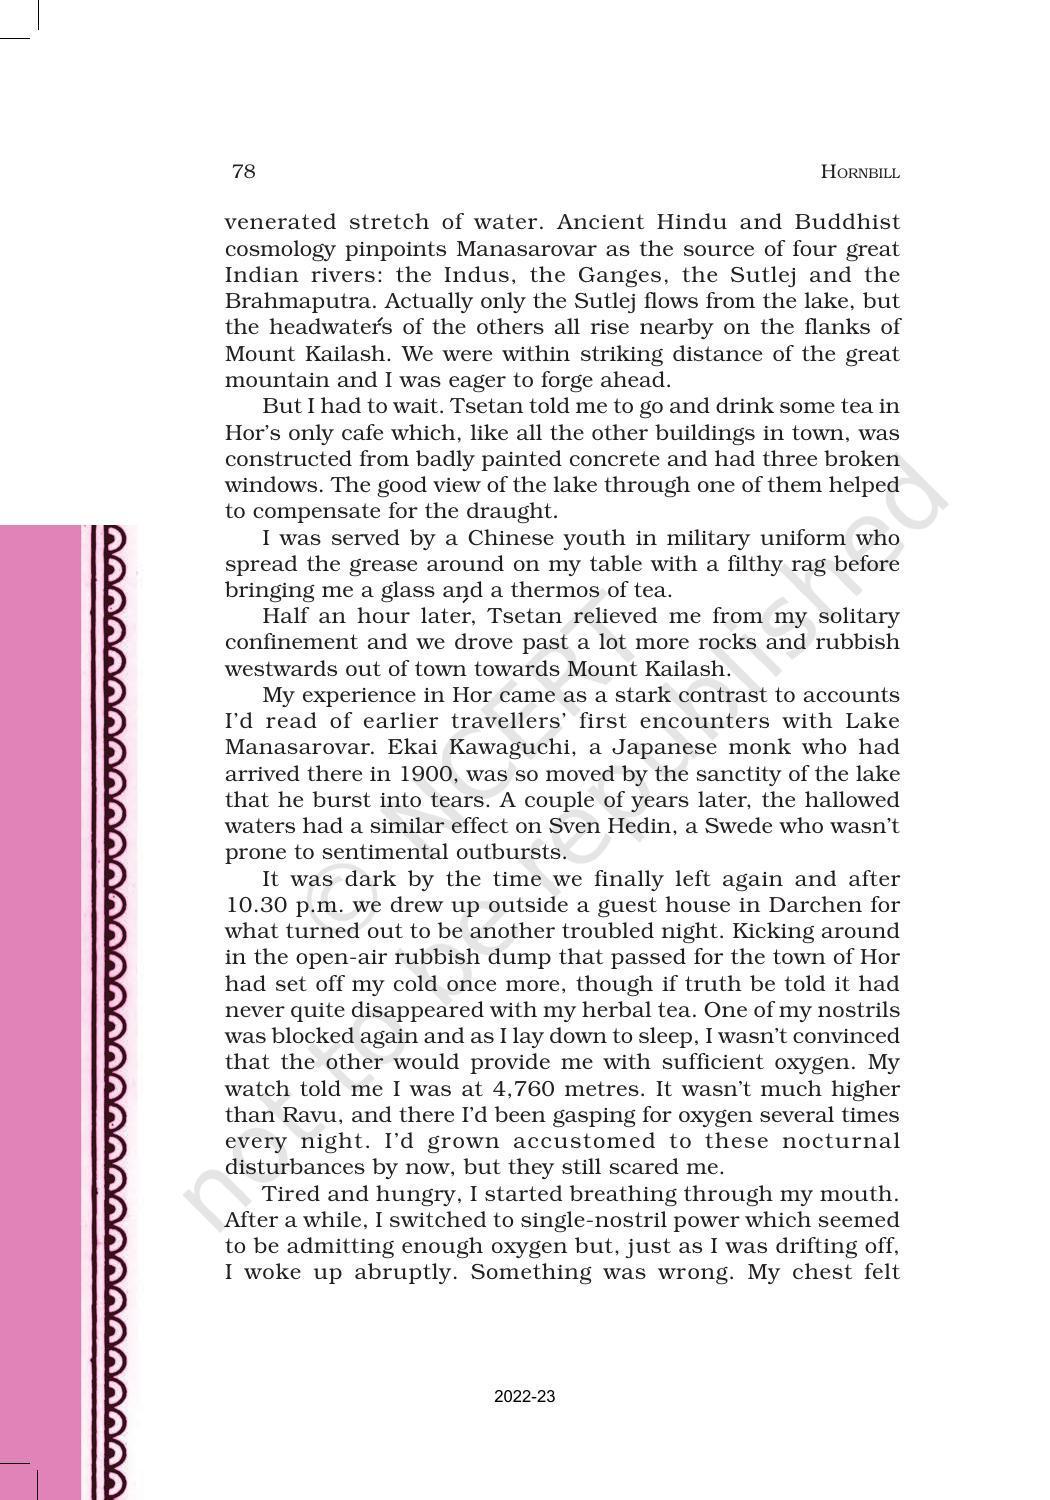 NCERT Book for Class 11 English Hornbill Chapter 8 Silk Road - Page 5